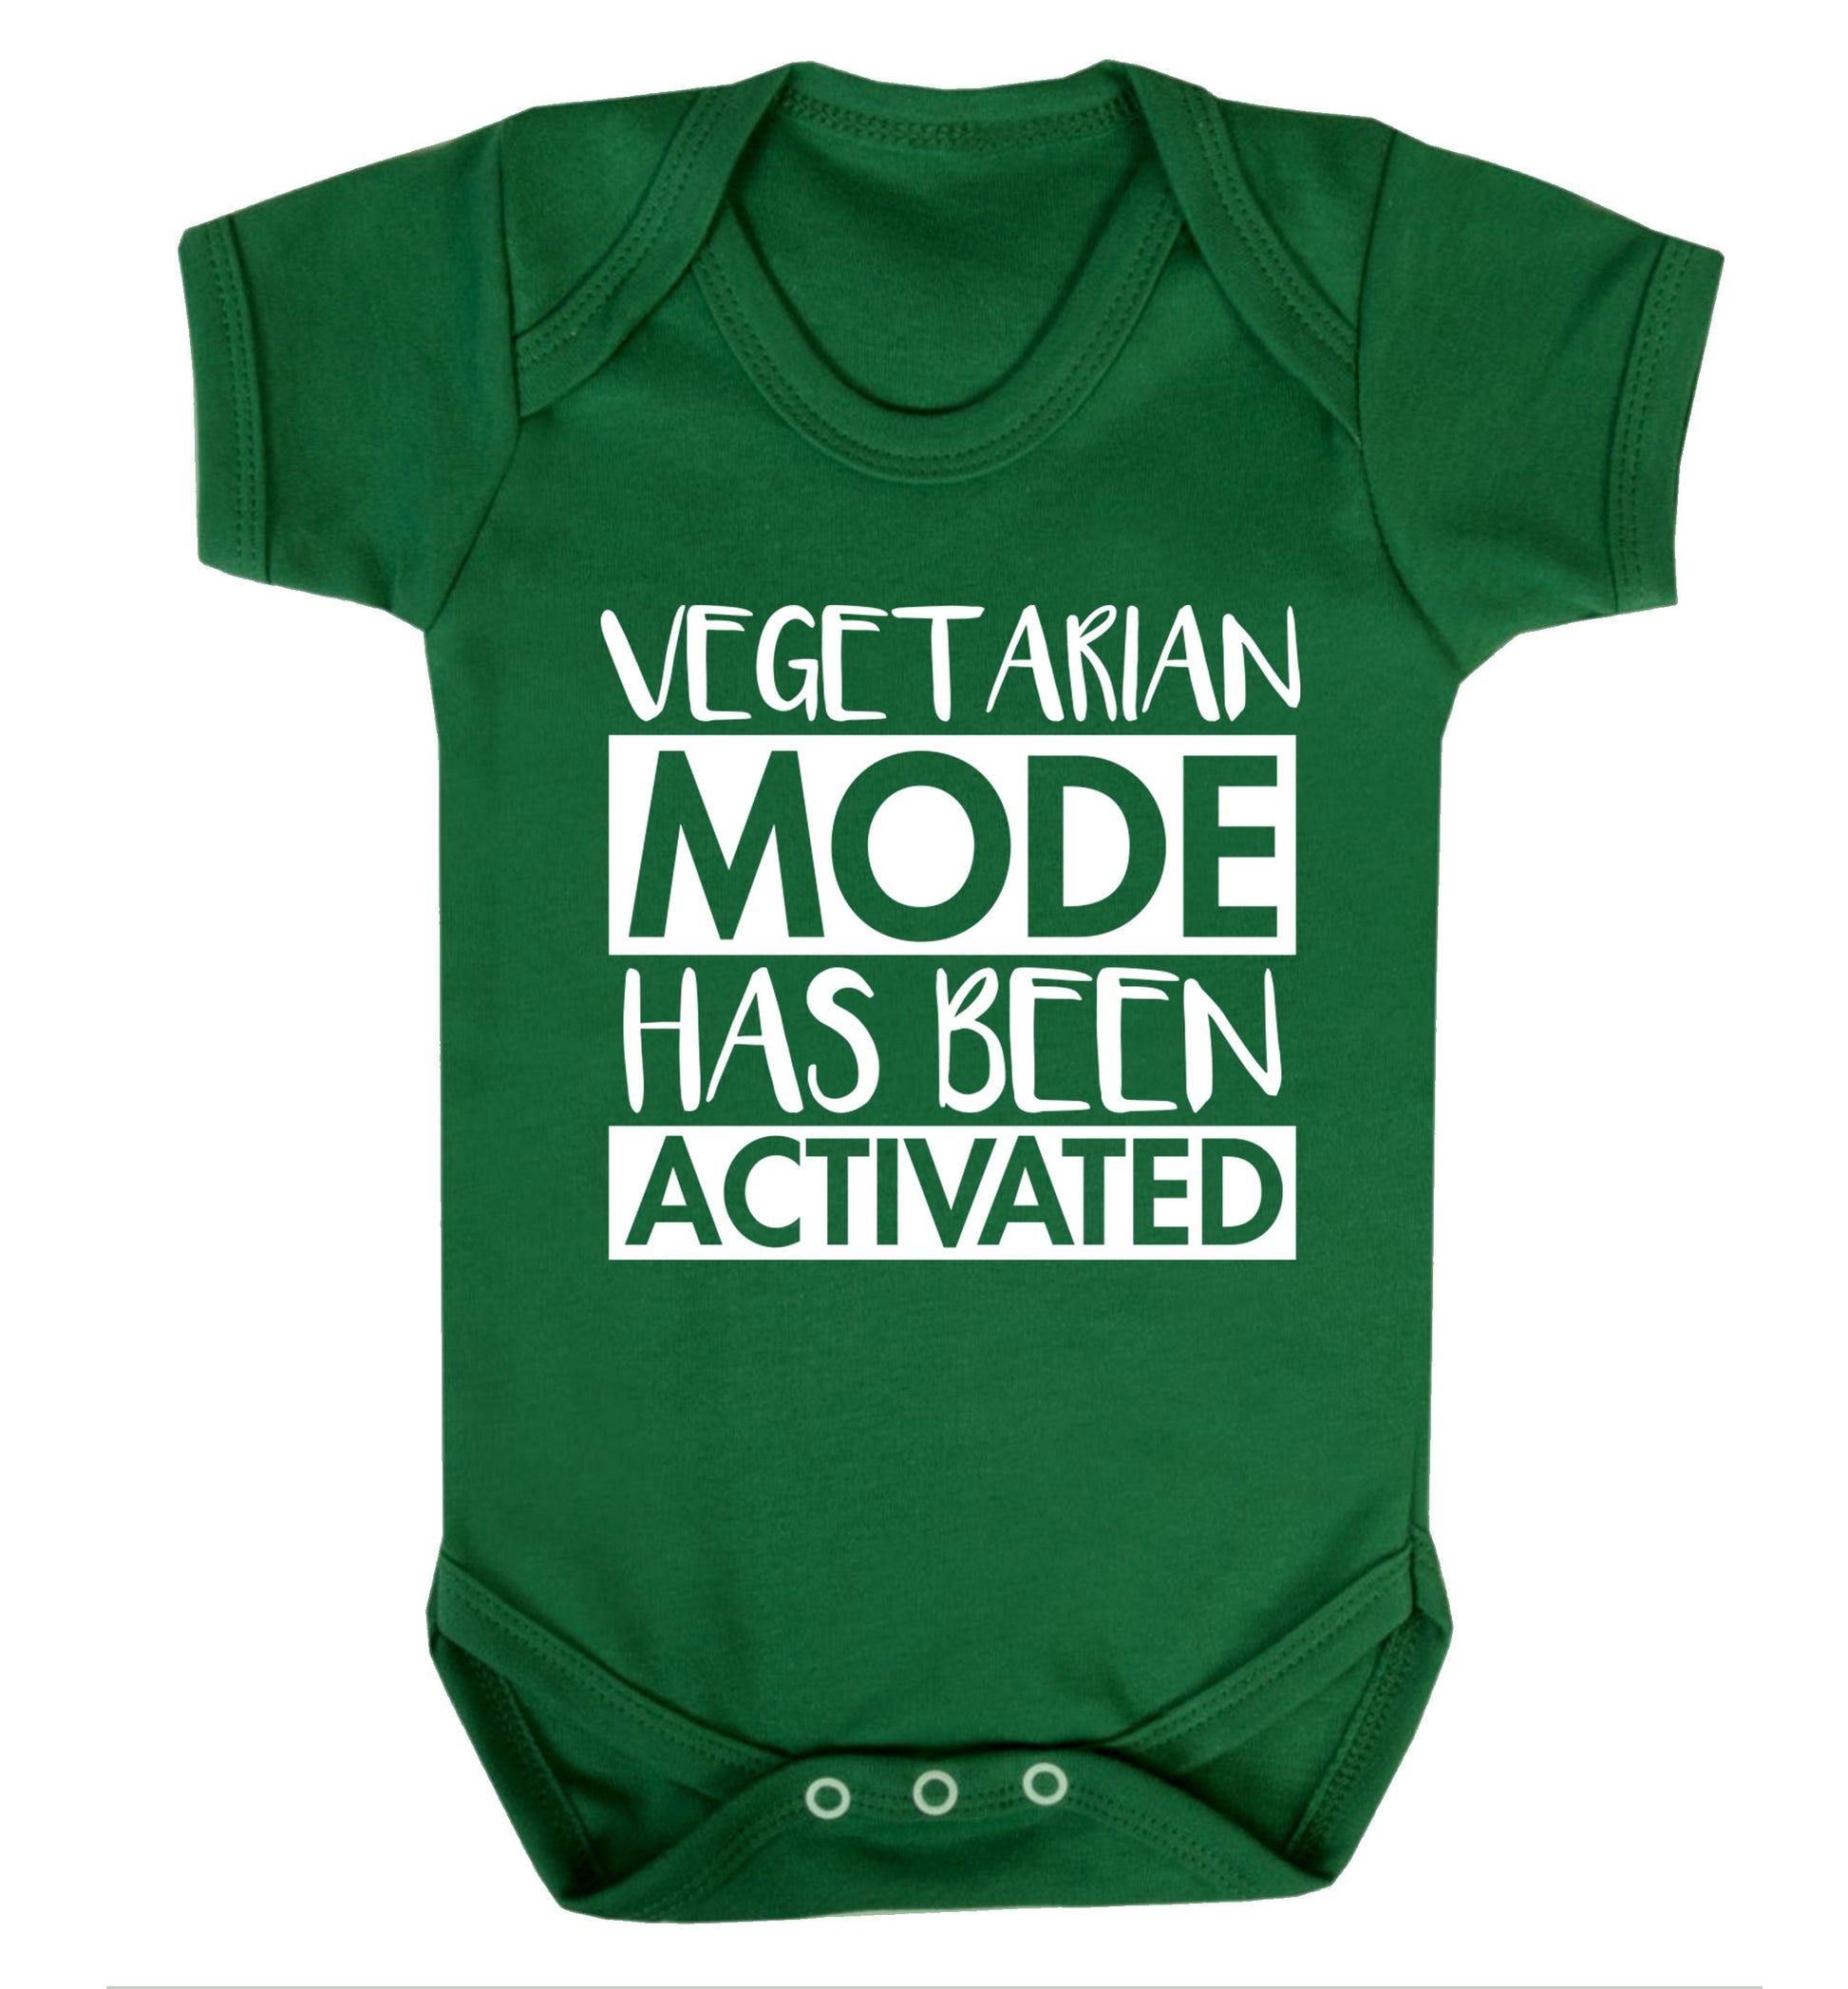 Vegetarian mode activated Baby Vest green 18-24 months